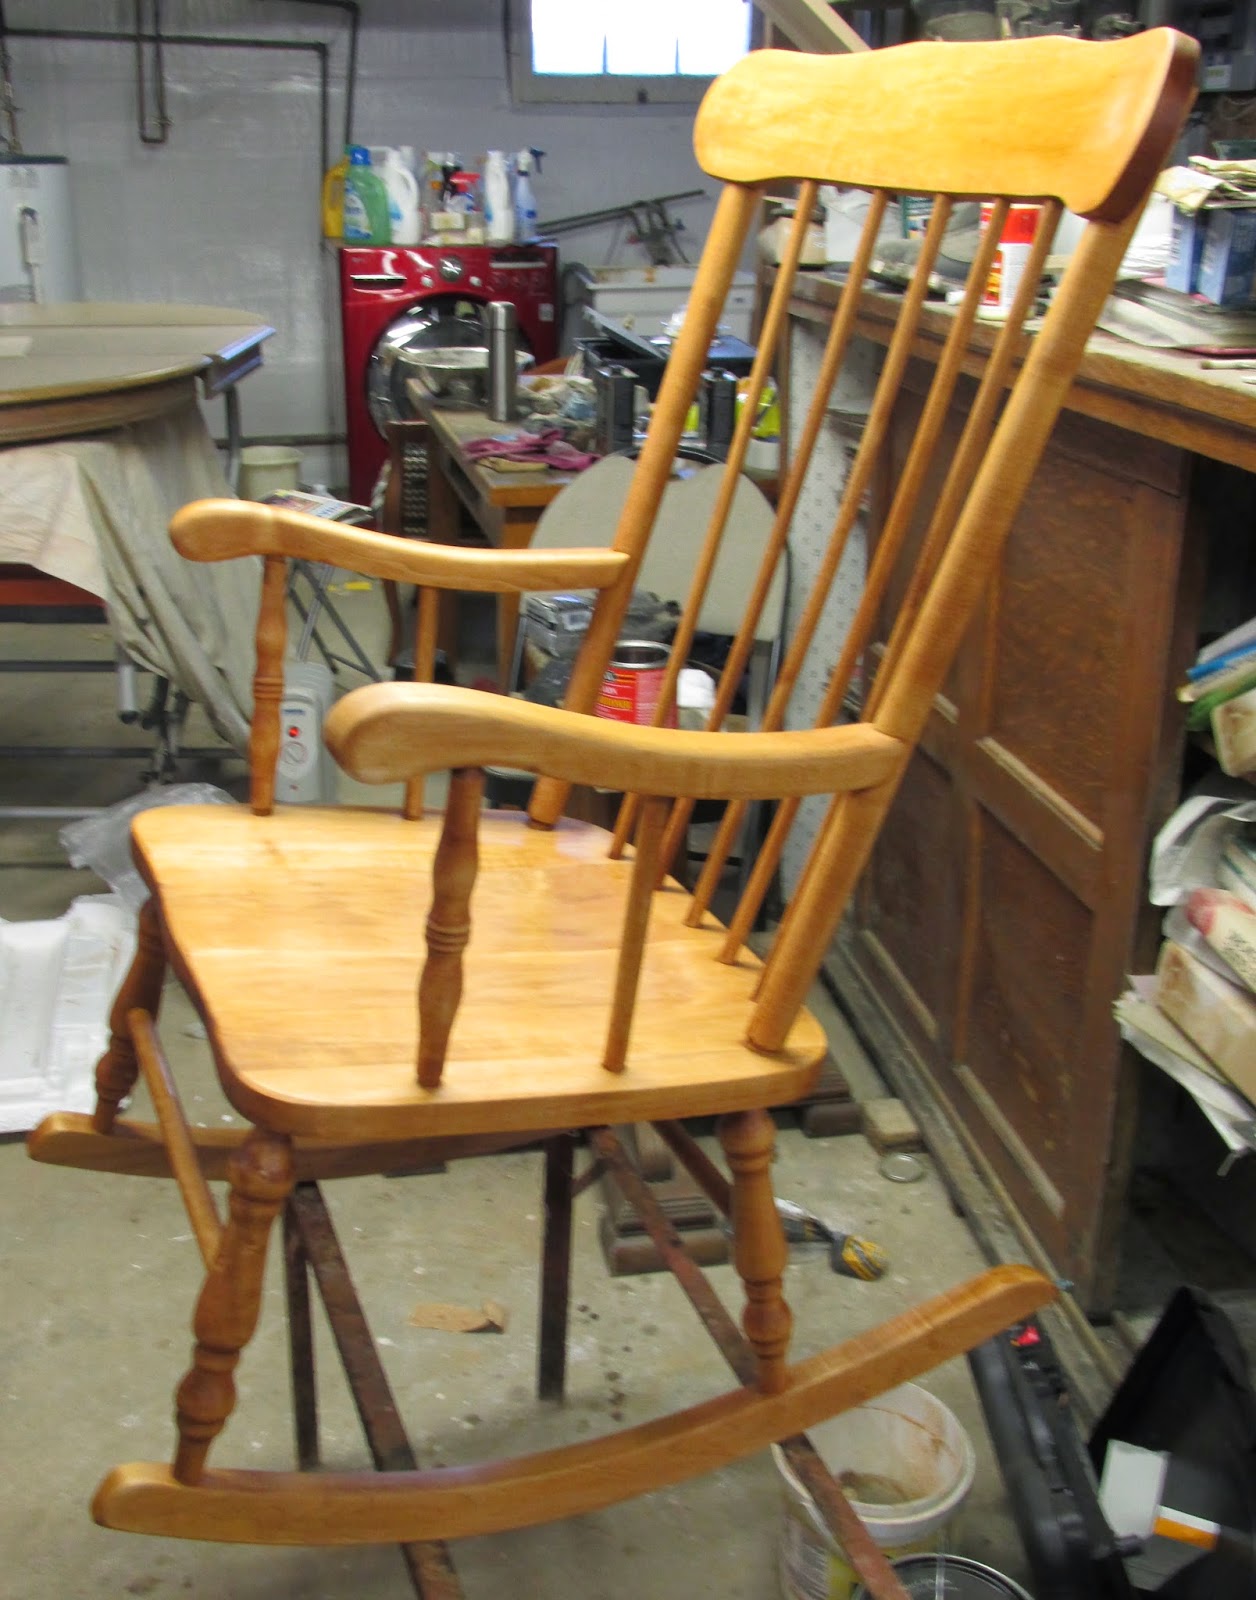 Repurpose/Refinishing projects: Refinishing a rocking chair